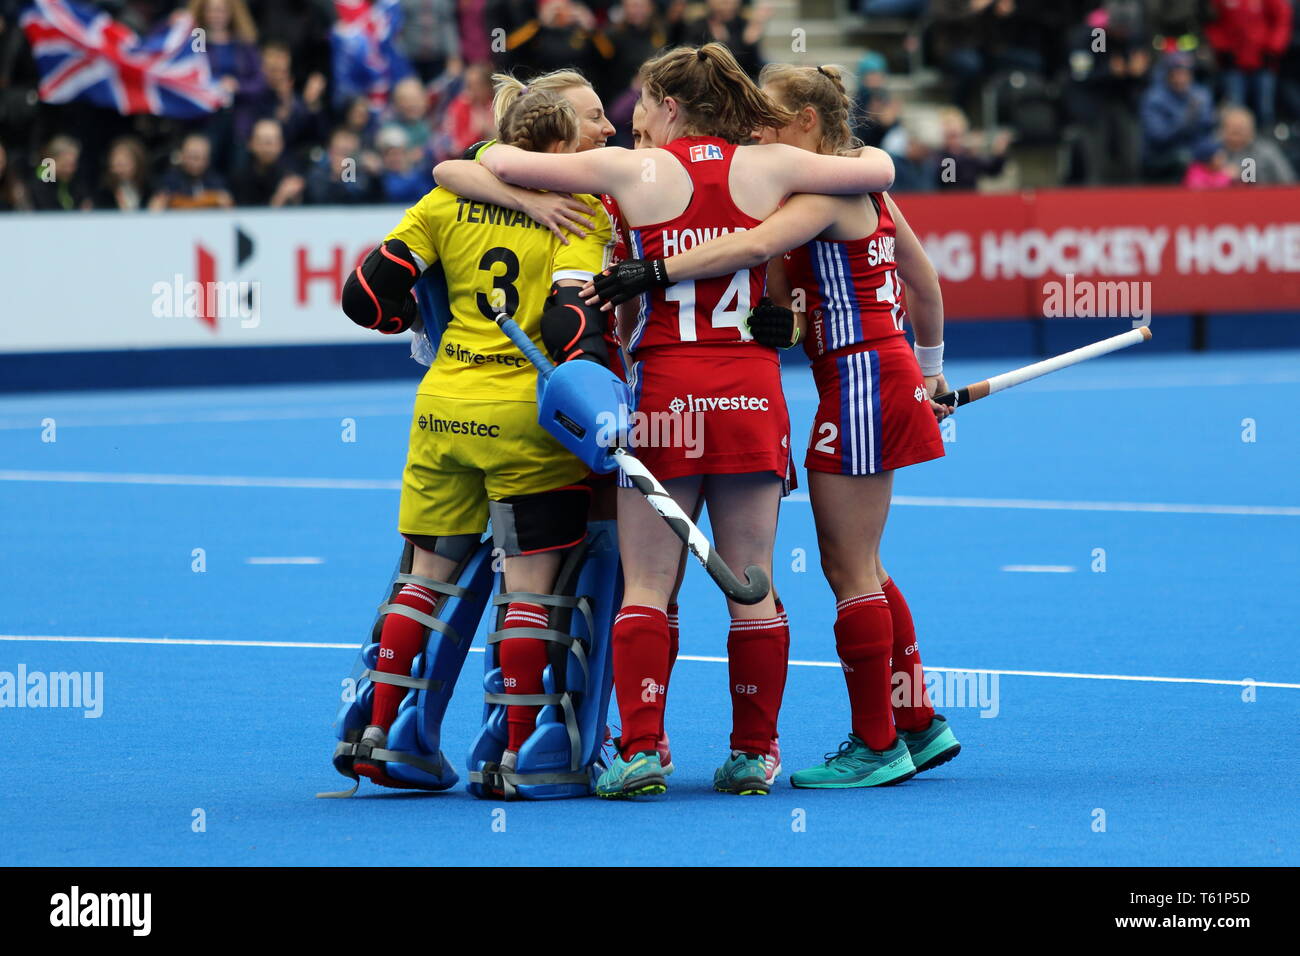 Celebration after winning 2:1 in the 2019 FIH Pro League Great Britain v United States women’s hockey match at Queens Elizabeth Olympic Park, London.  Stock Photo